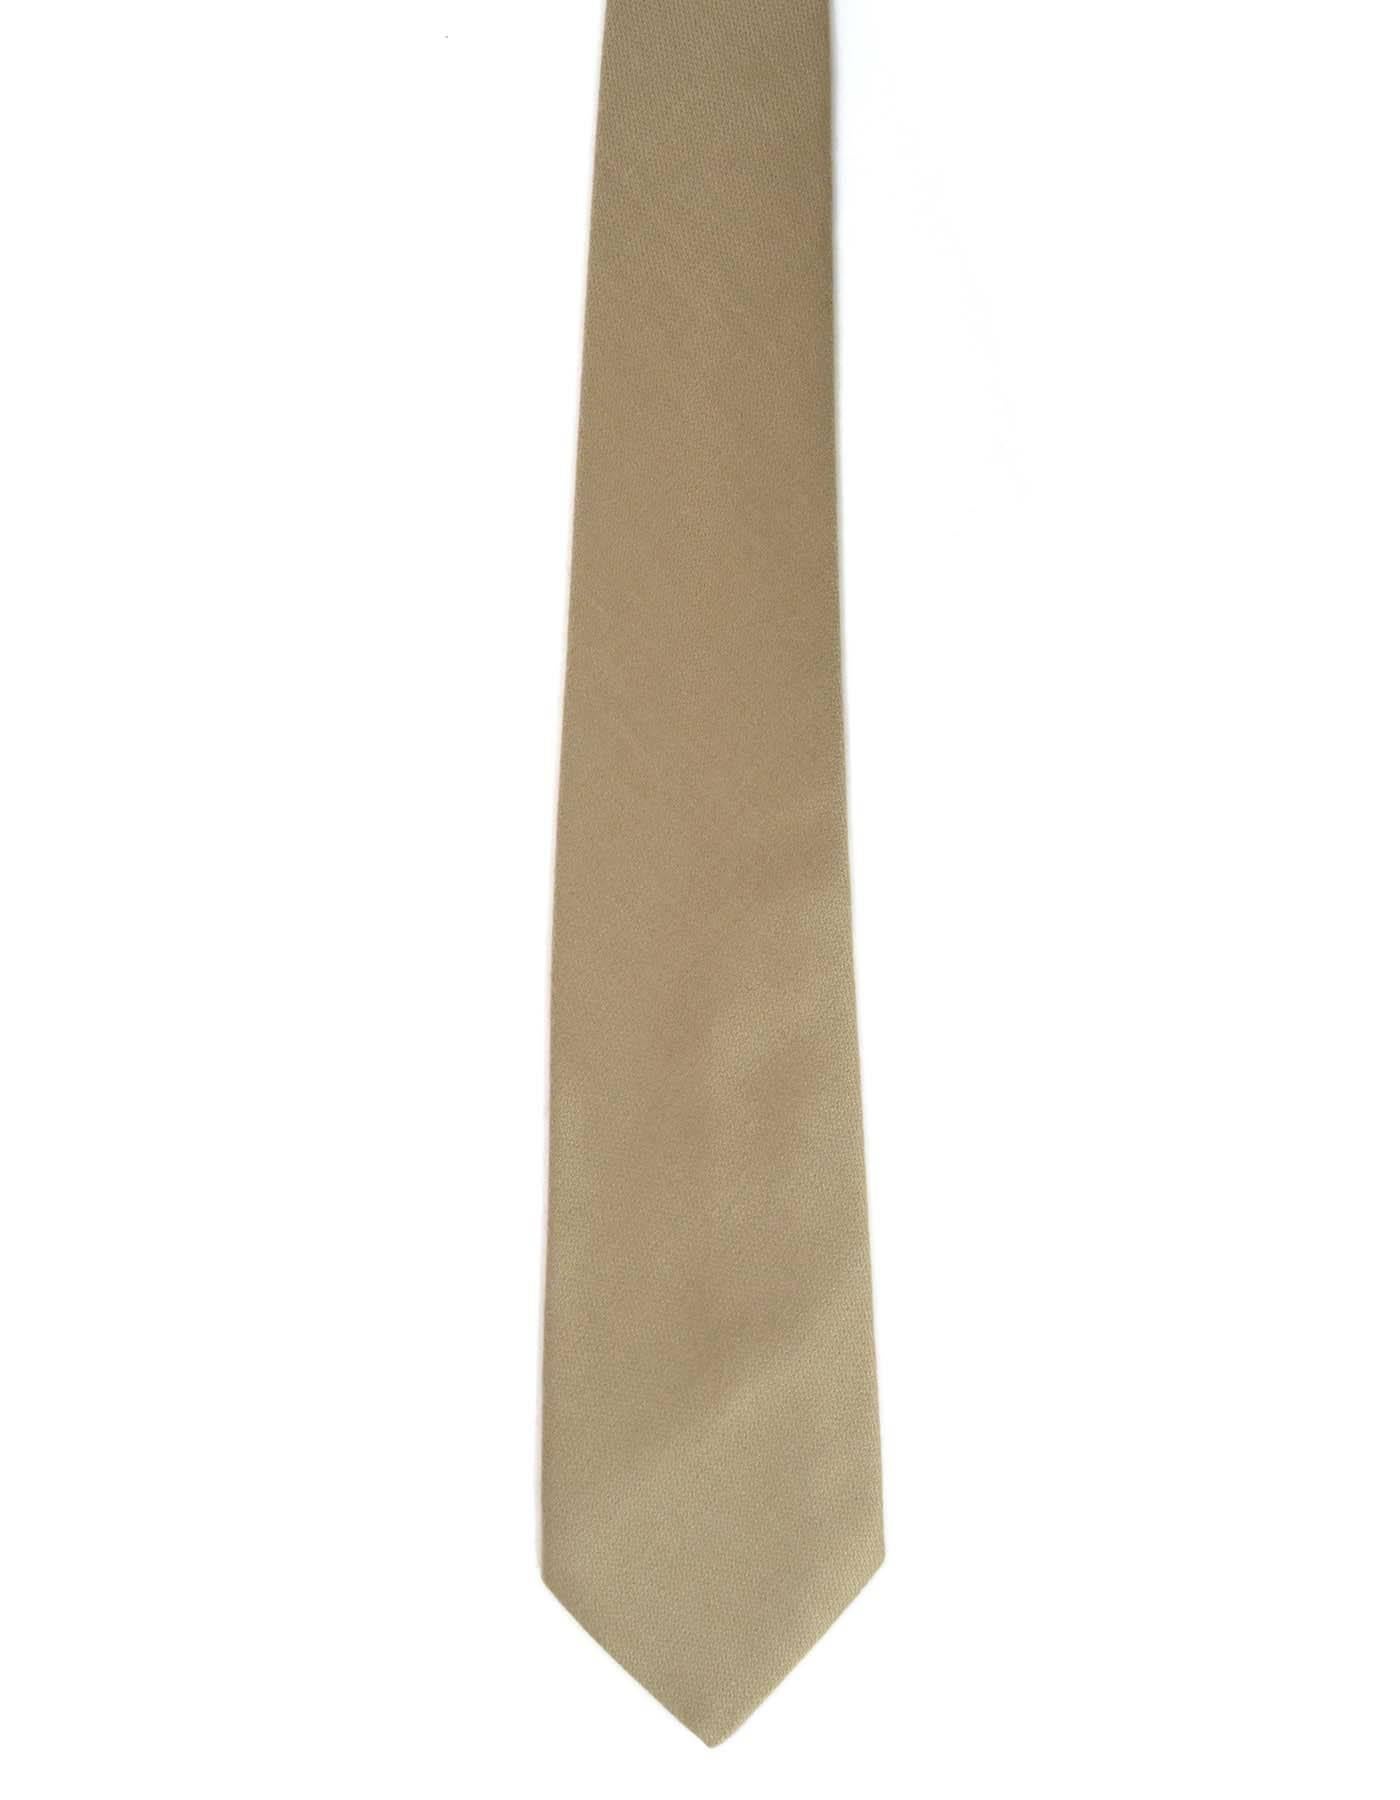 Hermes Tan Silk Tie
Made In: France
Color: Tan
Composition: 100% silk
Overall Condition: Excellent pre-owned condition with the exception of some minor pilling throughout
Measurements: 
Length: 56"
Width: 3.5"